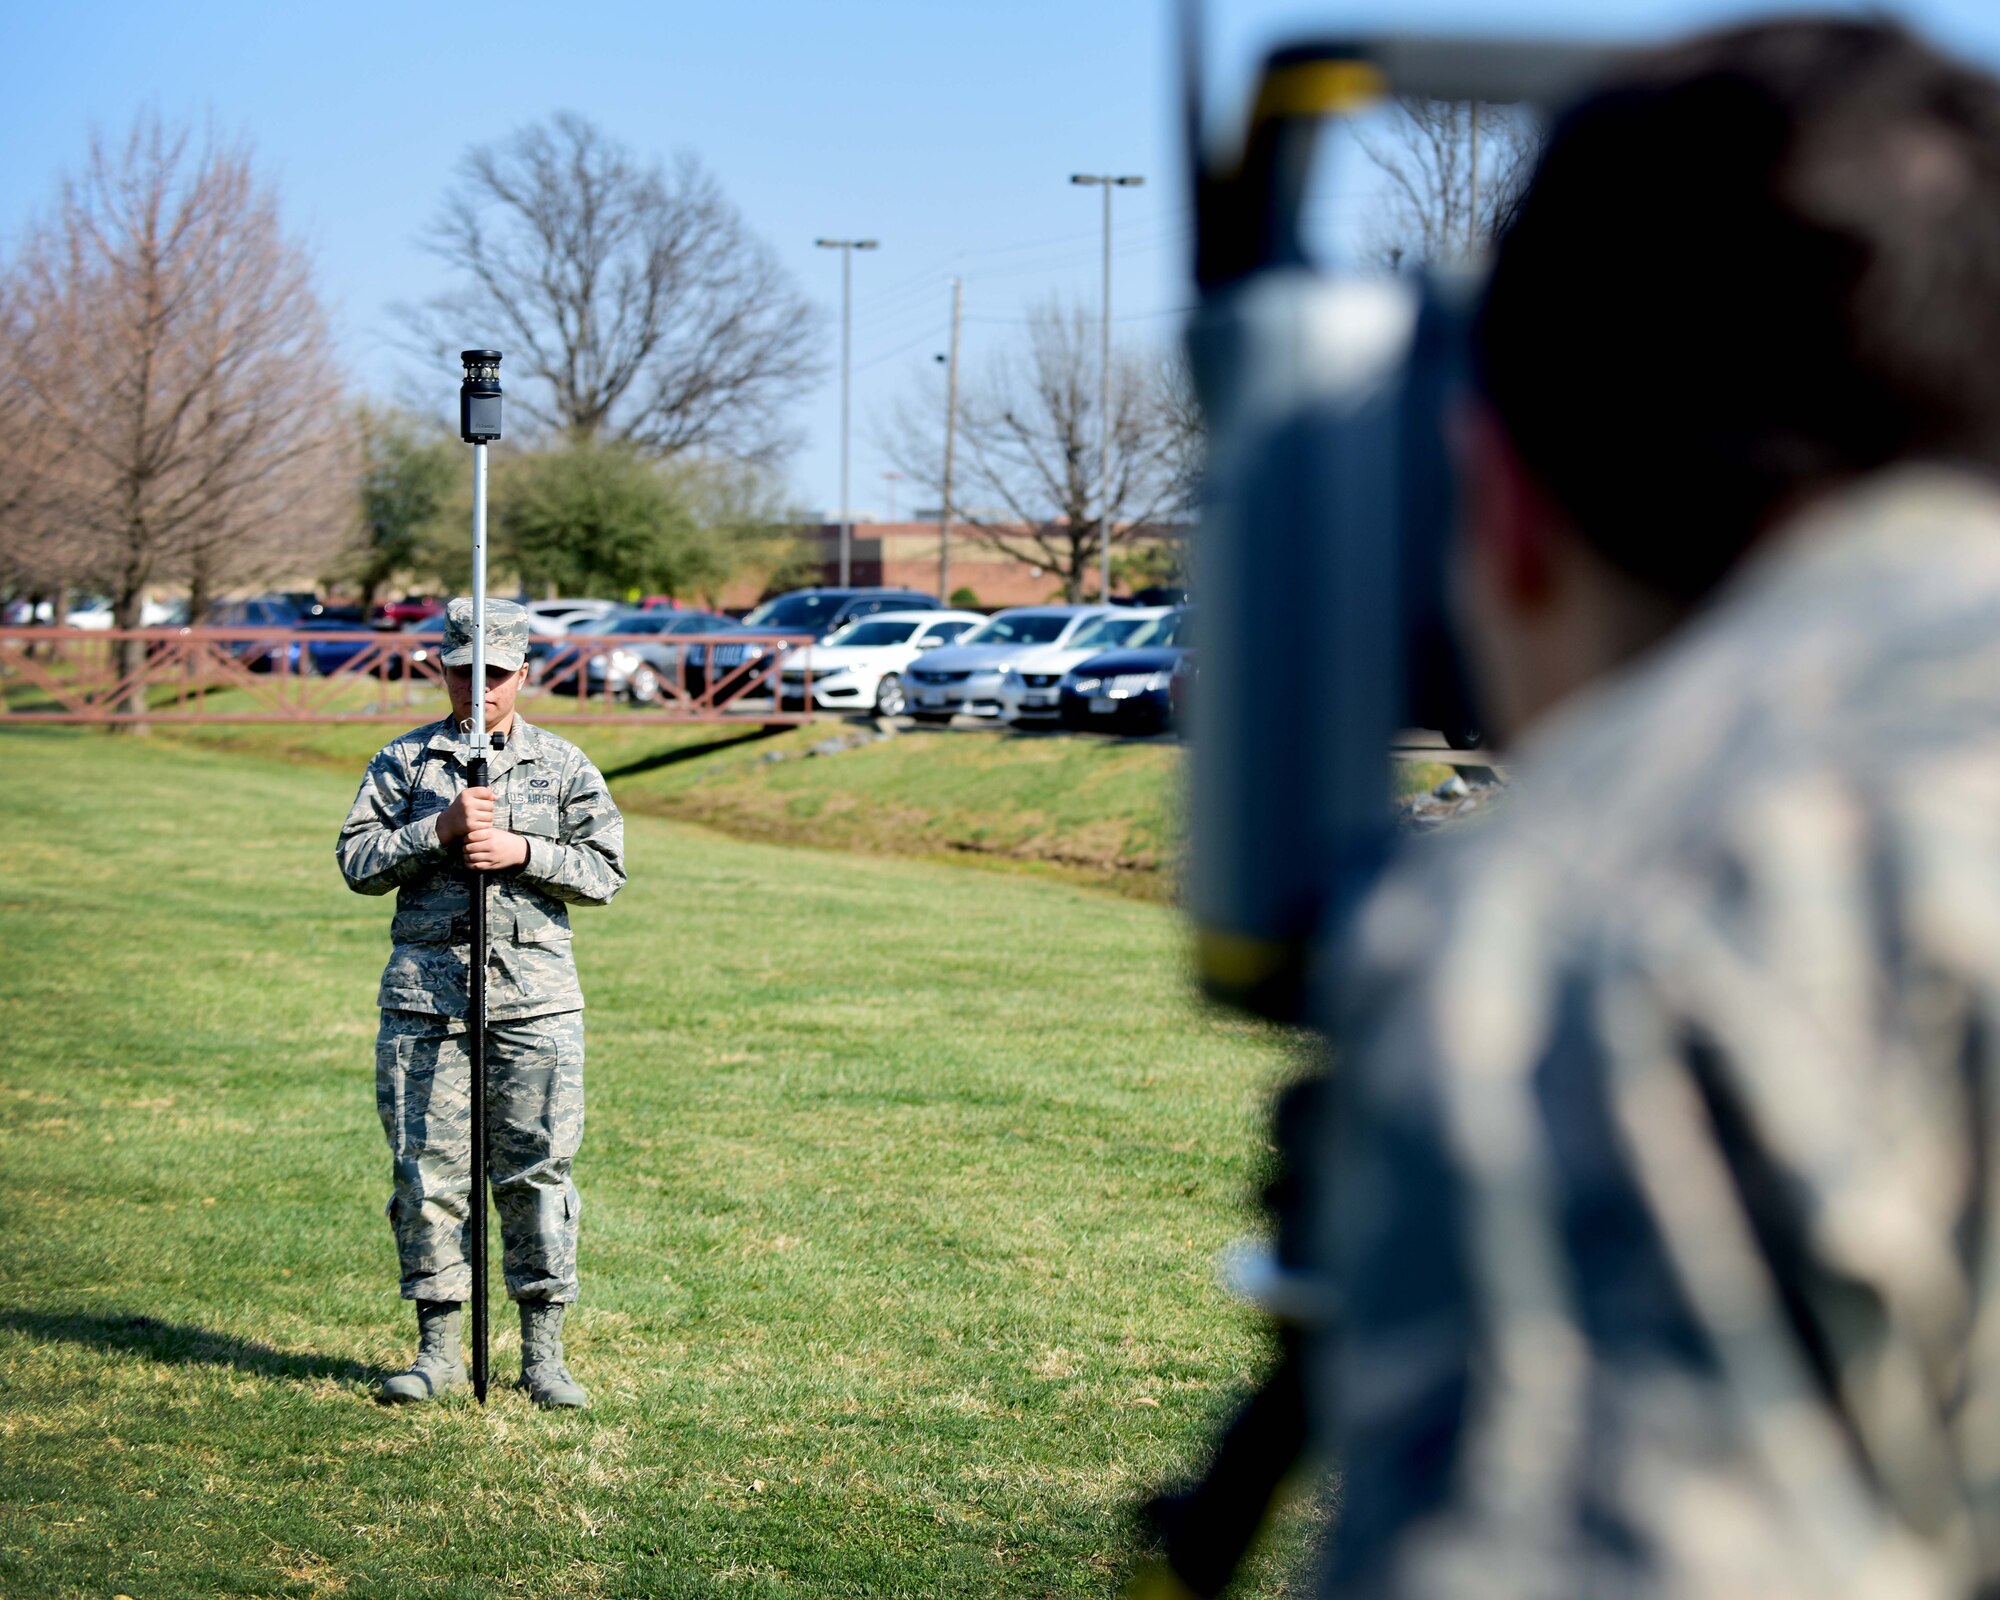 From left, U.S. Air Force Airman Gabrielle Victor and Airman 1st Class Ryan Mundt, 633rd Civil Engineer Squadron engineering technicians, prepare for an optical site survey, at Joint Base Langley-Eustis, Va., March 9, 2017. Victor and Mundt are members of the mapping section, which fulfills requests, such as finding appropriate locations for projects and estimating the resources needed for them. (U.S. Air Force photo/Senior Airman Areca T. Bell)